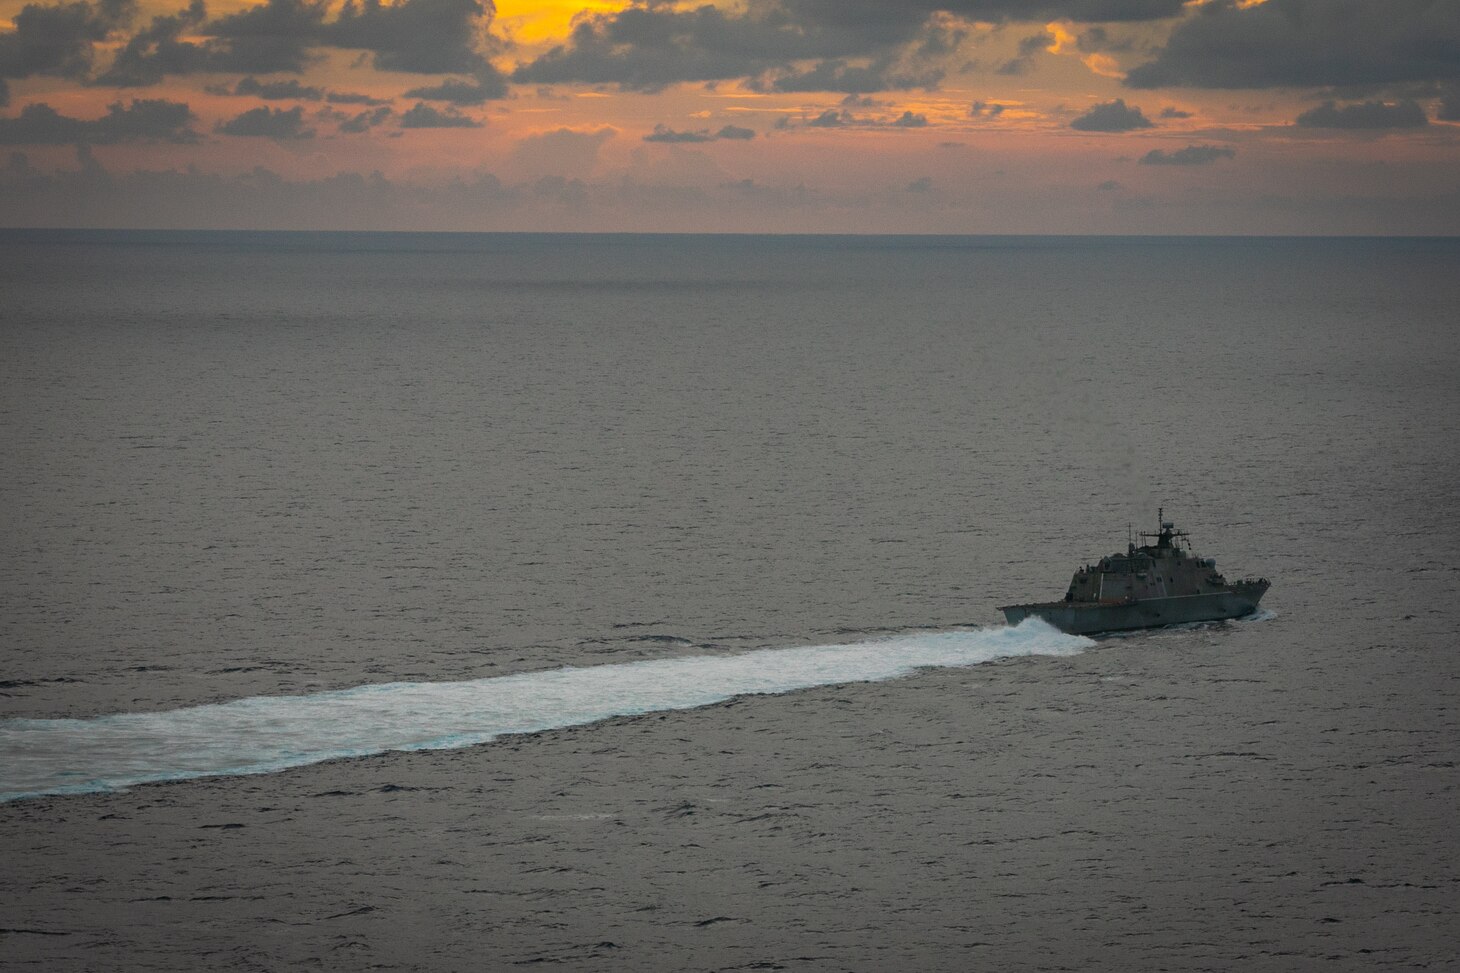 The Freedom-variant littoral combat ship USS Sioux City (LCS 11) steams in the Caribbean Sea.